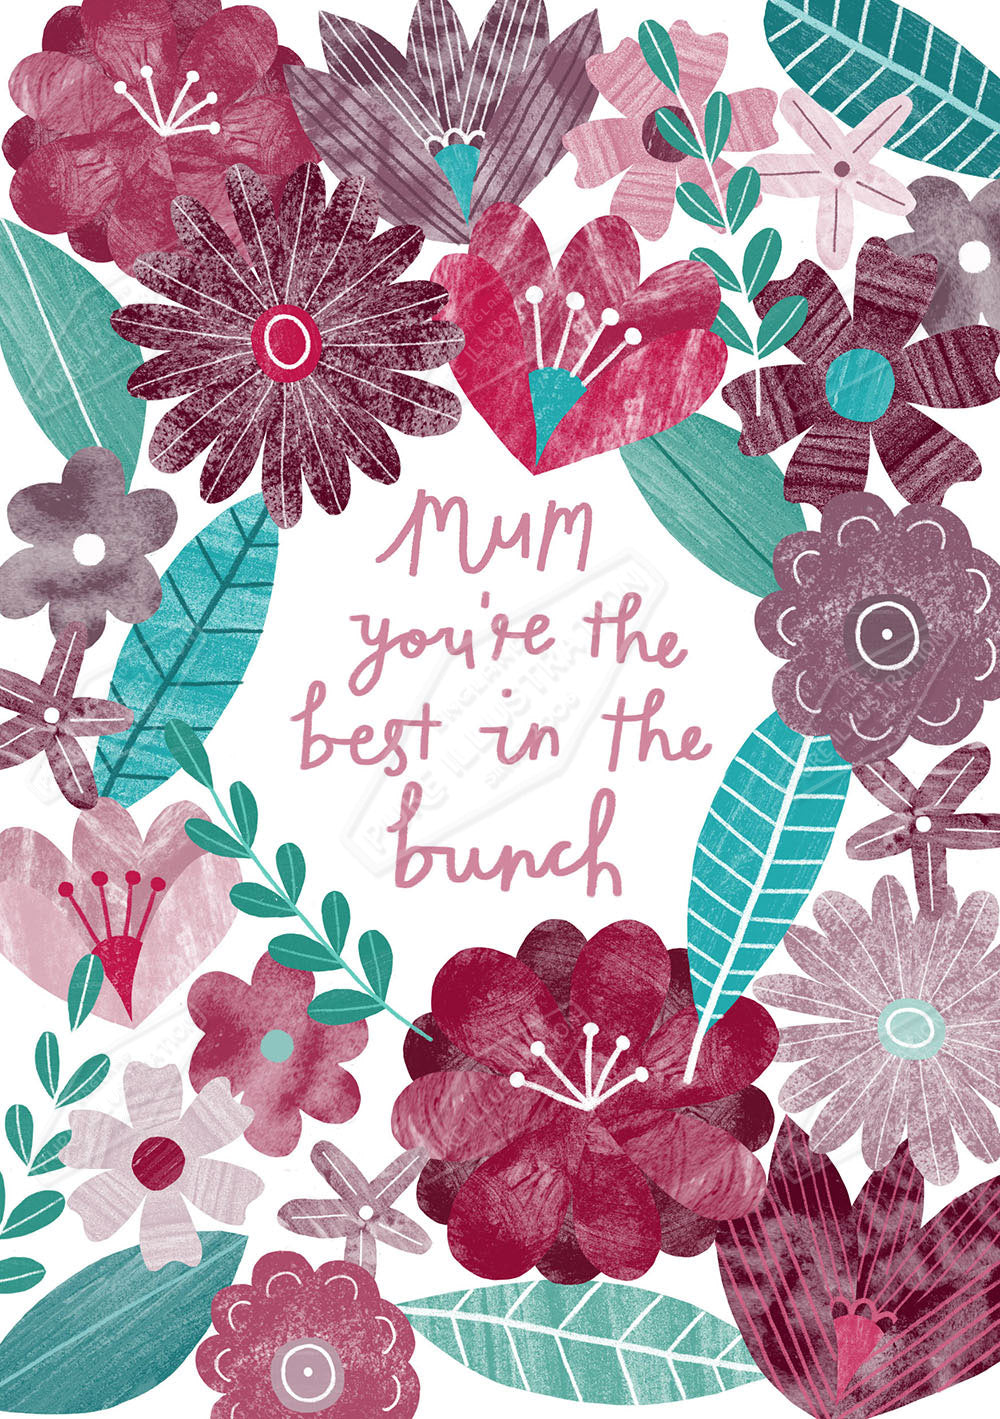 00034880LBR - Mother's Day flowers By Leah Brideaux - Pure Art Licensing Agency